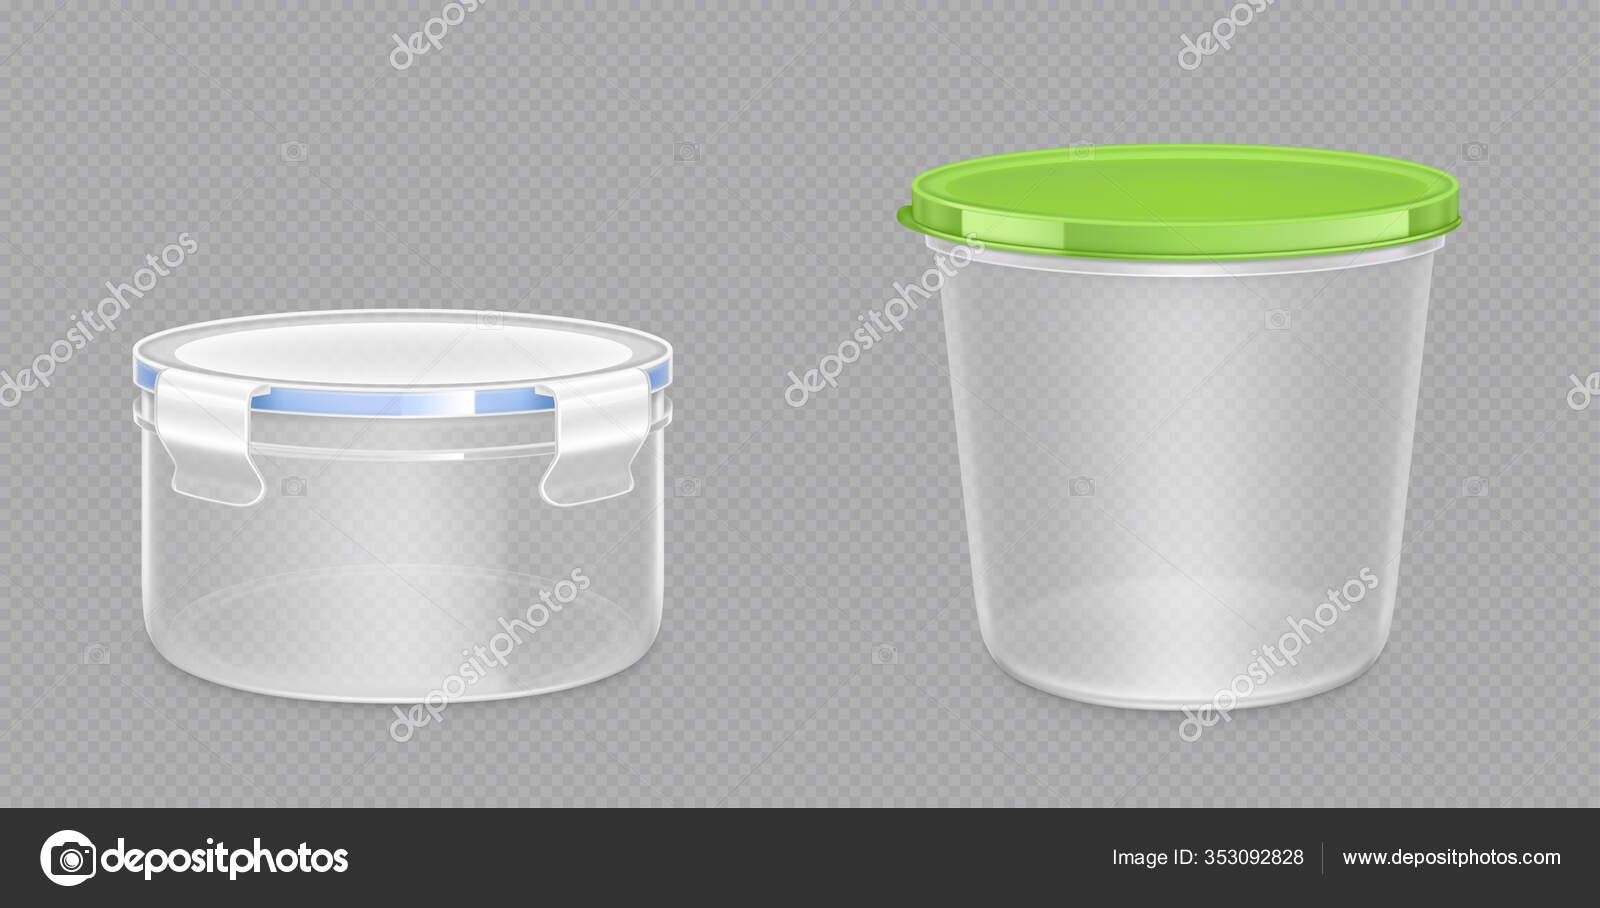 https://st3.depositphotos.com/3877249/35309/v/1600/depositphotos_353092828-stock-illustration-round-plastic-food-containers-with.jpg